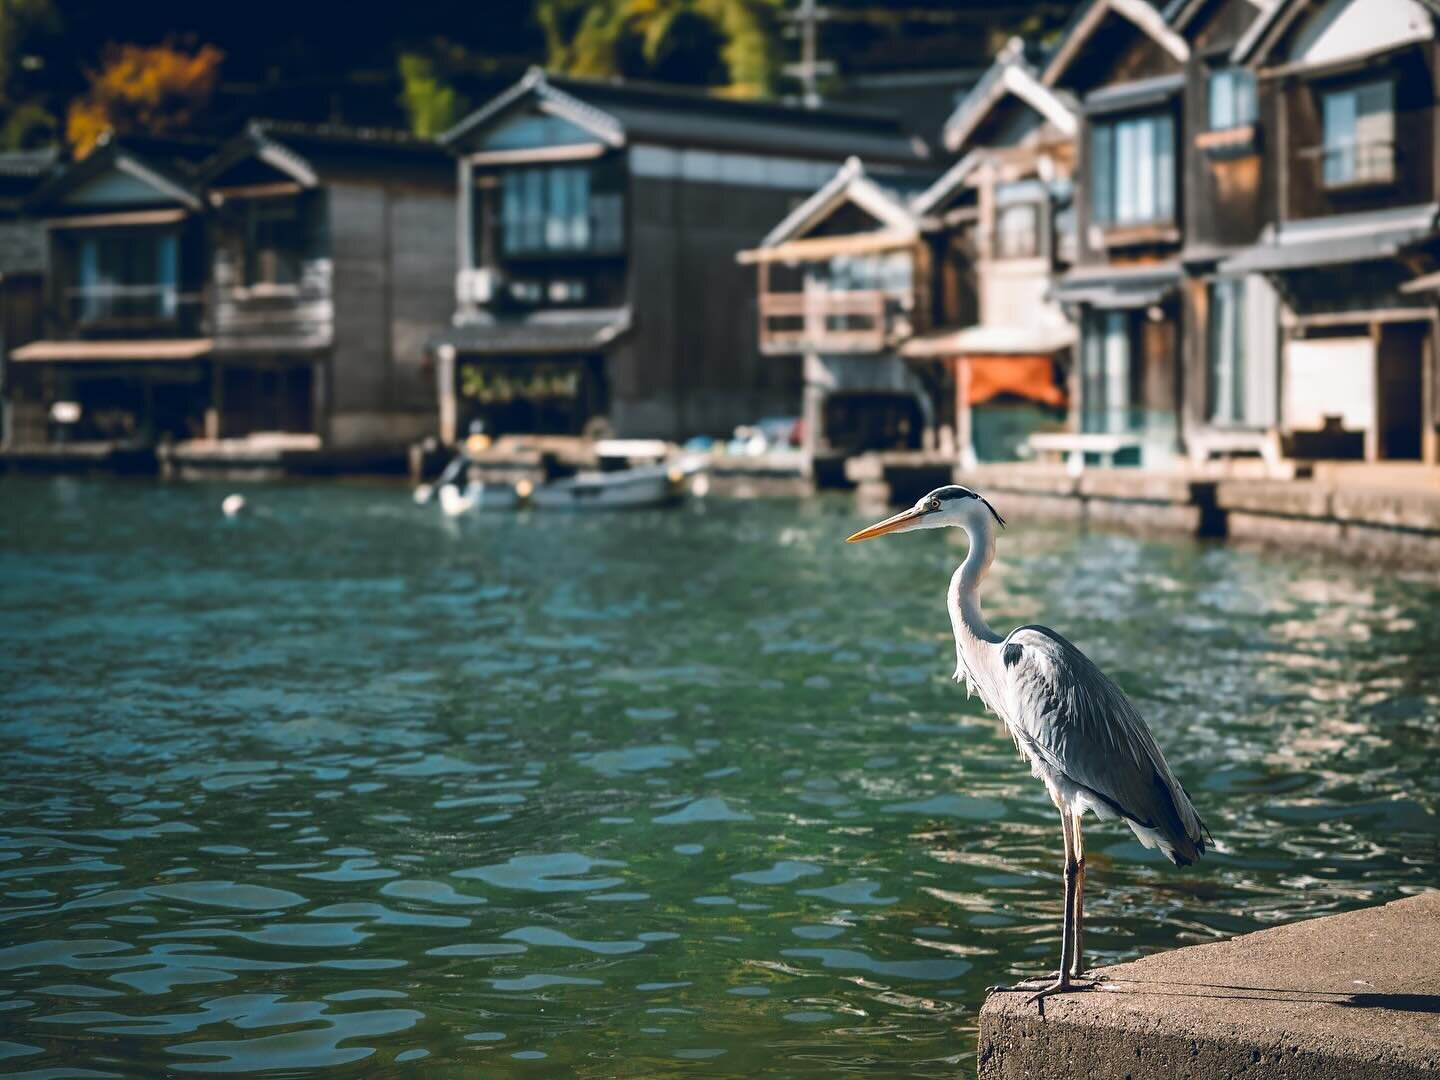 Funaya of Ine
&bull;
Ine-chō Ine-ura is a coastal settlement along the shores of Ine Bay, Yoza District, Kyoto Prefecture, Japan. 
The traditional fishing village has preserved its buildings and made for a fantastic day trip from Amanohashidate. 

Sh